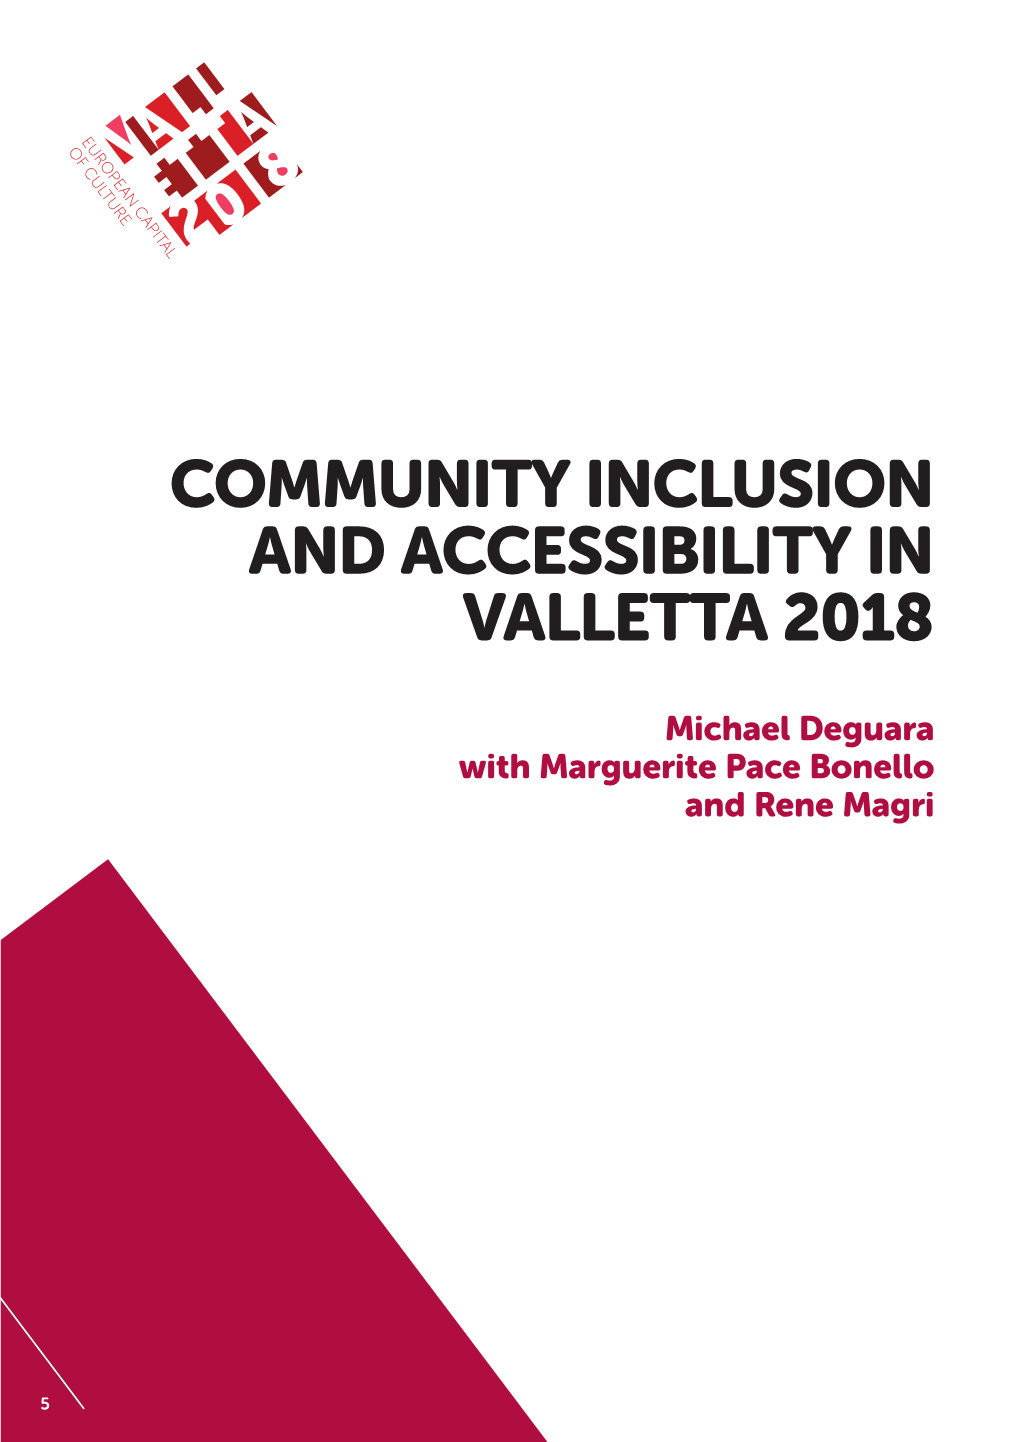 Community Inclusion and Accessibility in Valletta 2018